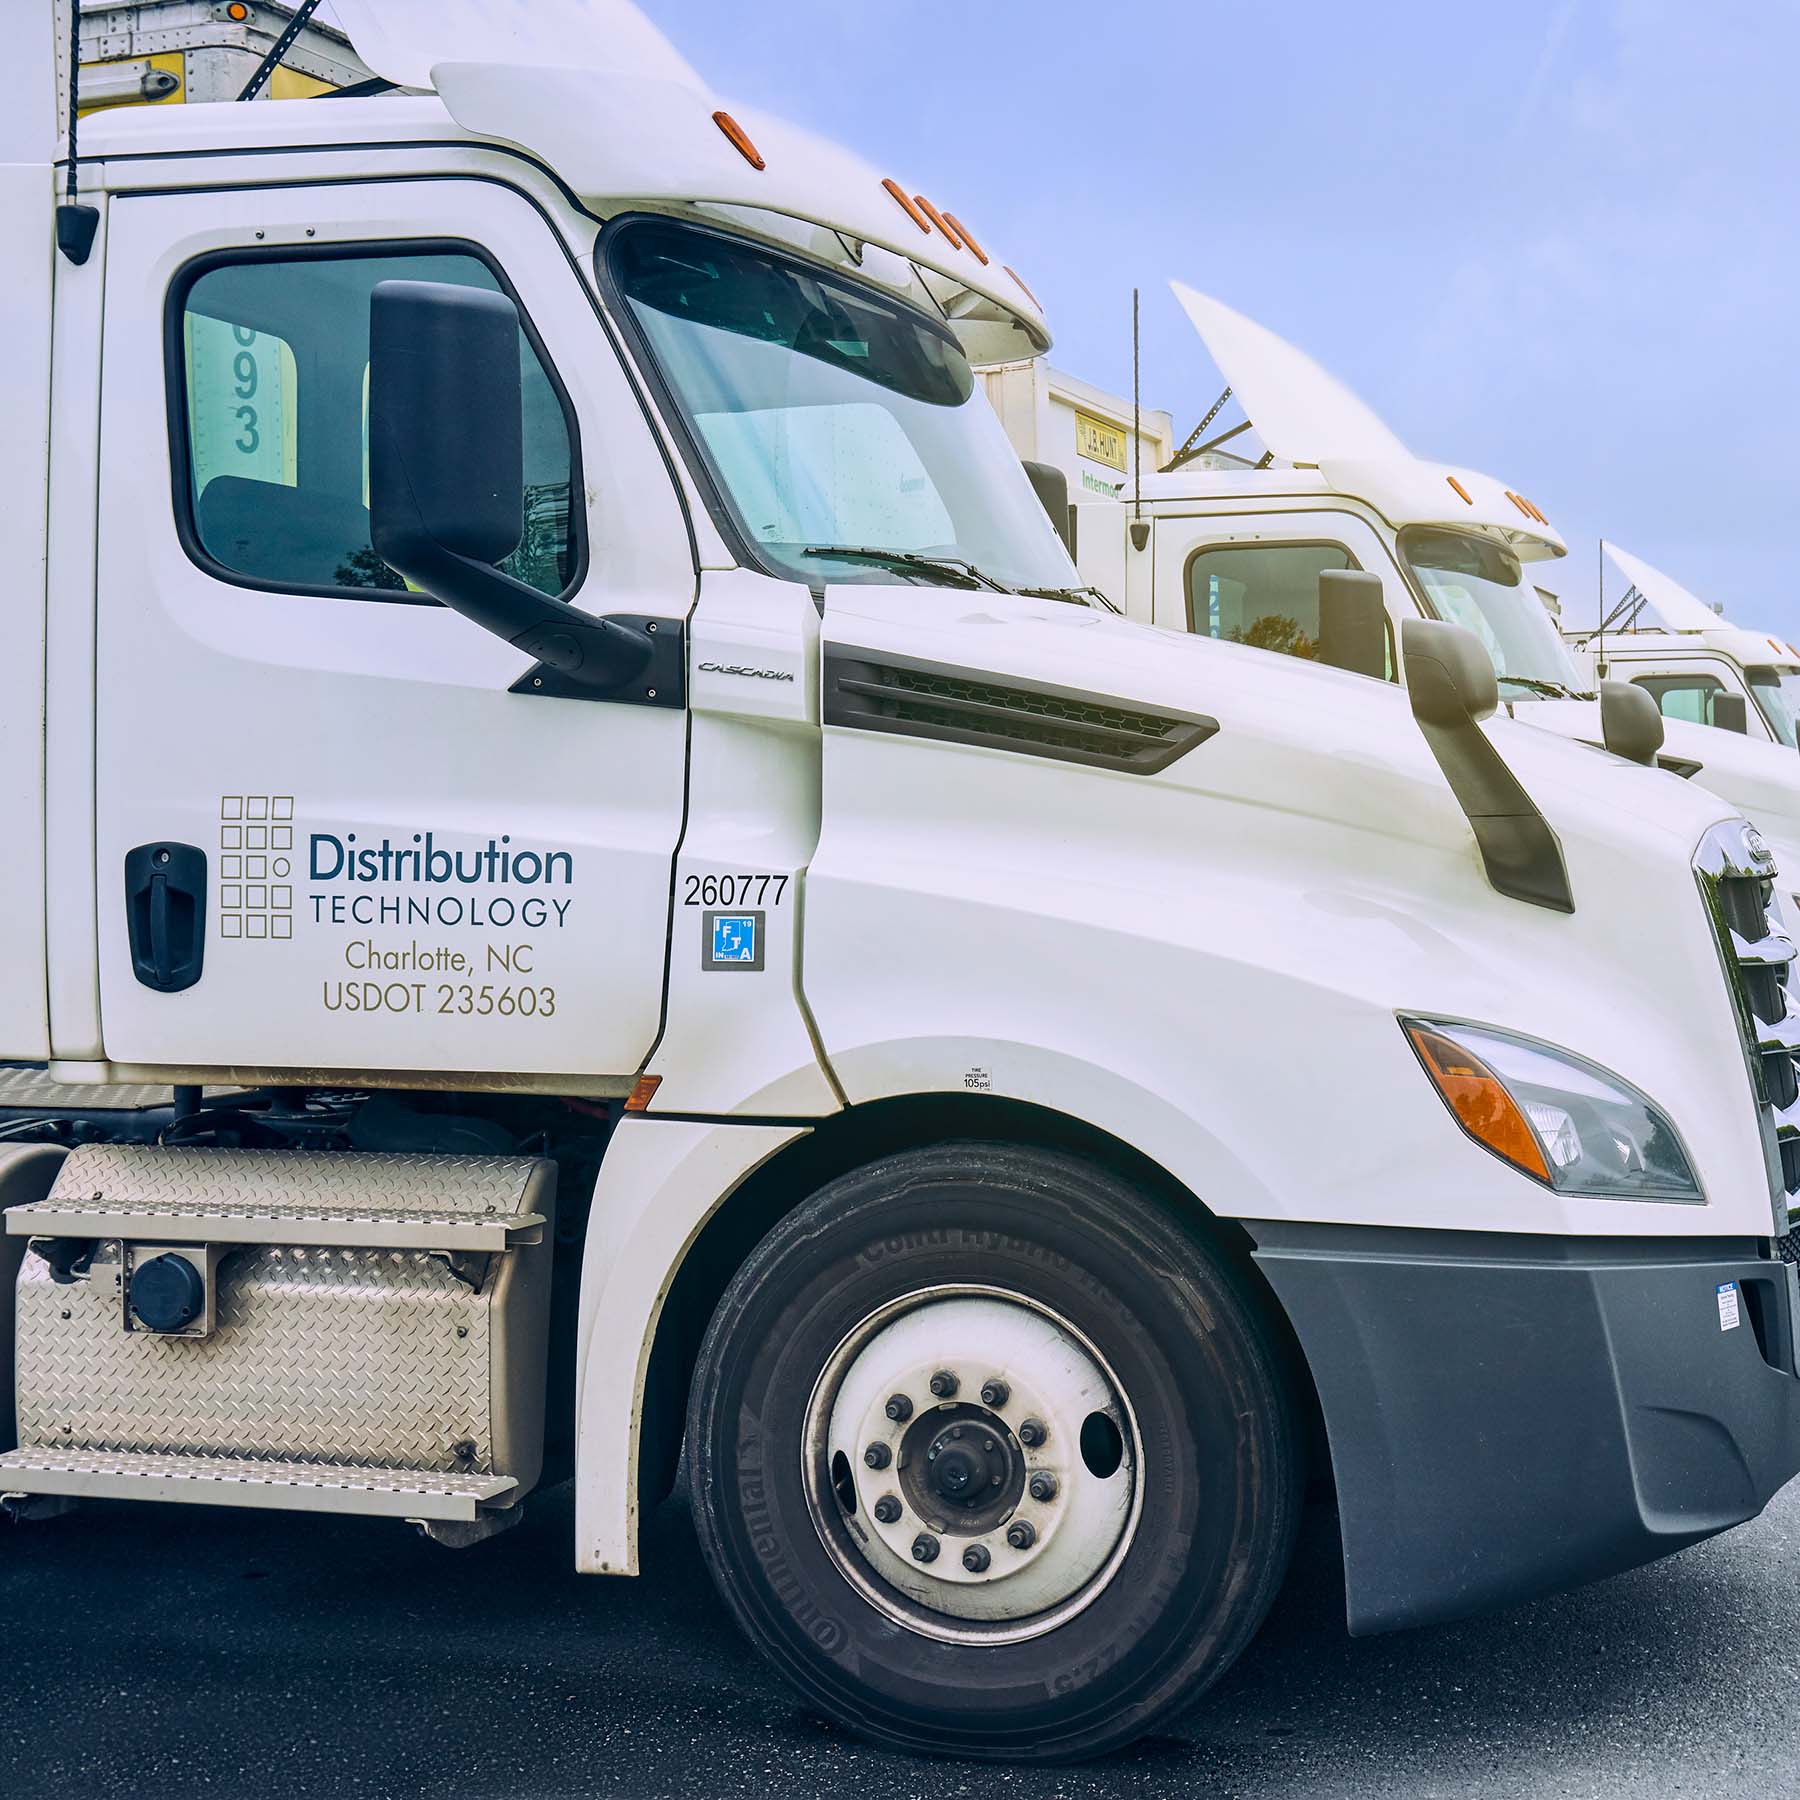 Distribution Technology's North Carolina transportation management services are supported by PDC Trucking, our company-owned trucking fleet, pictured here.